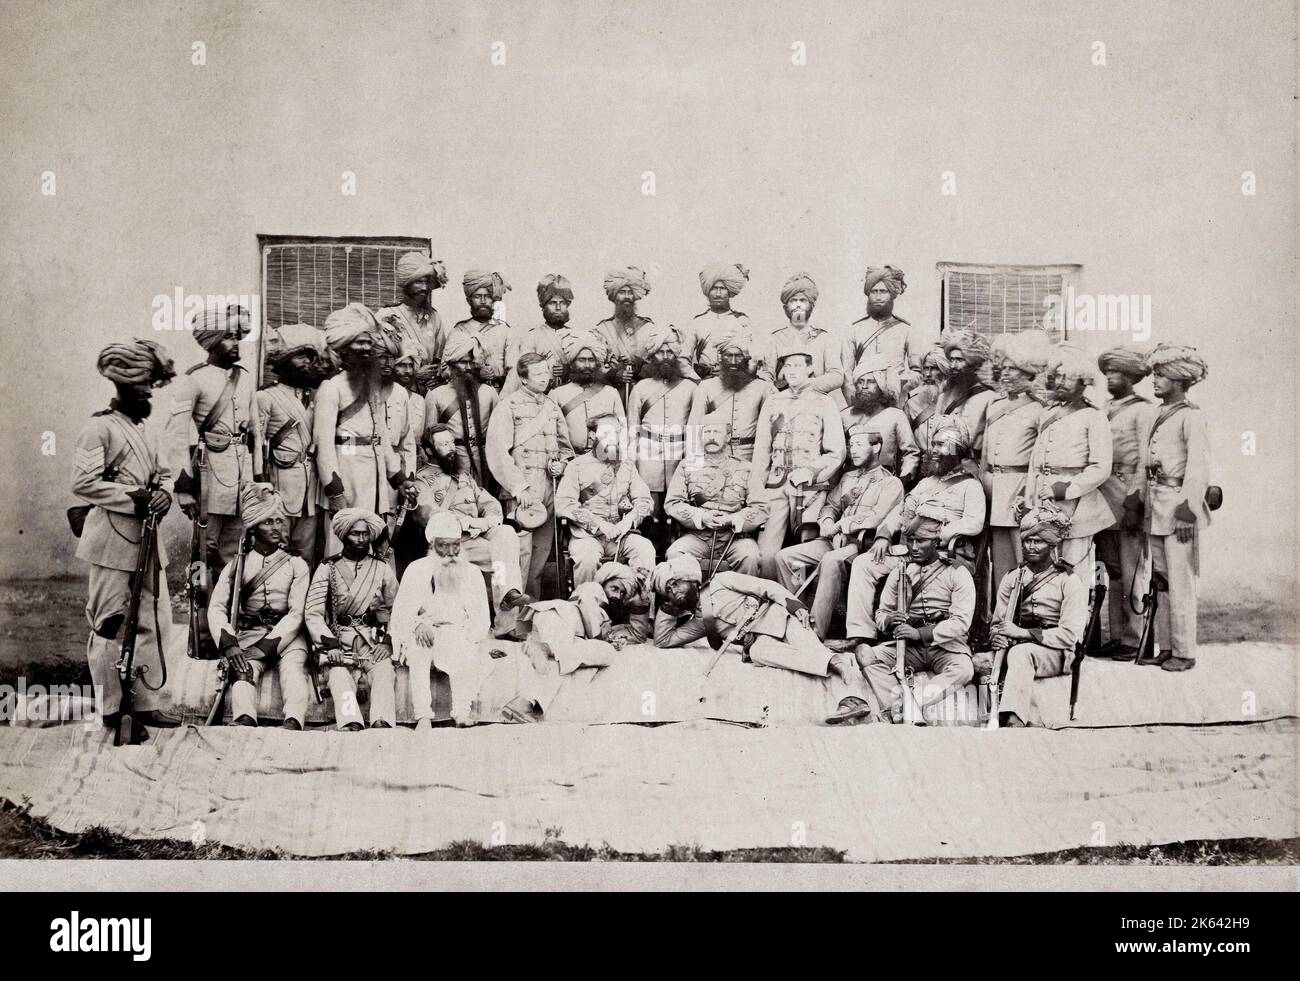 Vintage 19th century photograph - British army in India, 1860s - Colonel Brownlow and men of the !st Sikhs 1866 Stock Photo